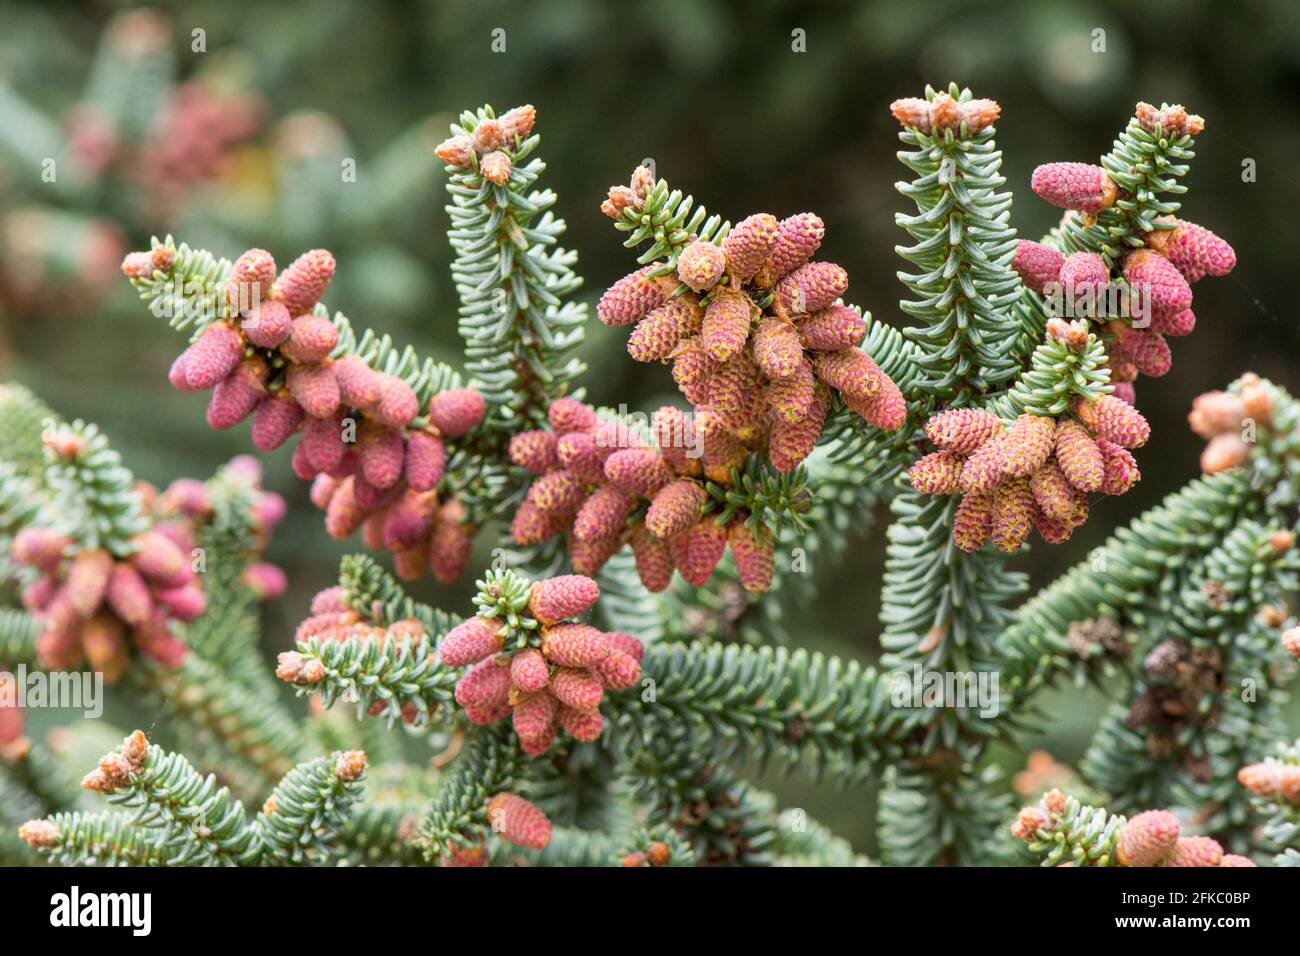 Spanish fir, Abies pinsapo, close up of male cones in spring. Sierra de las nieves, Andalucia, Spain. Stock Photo